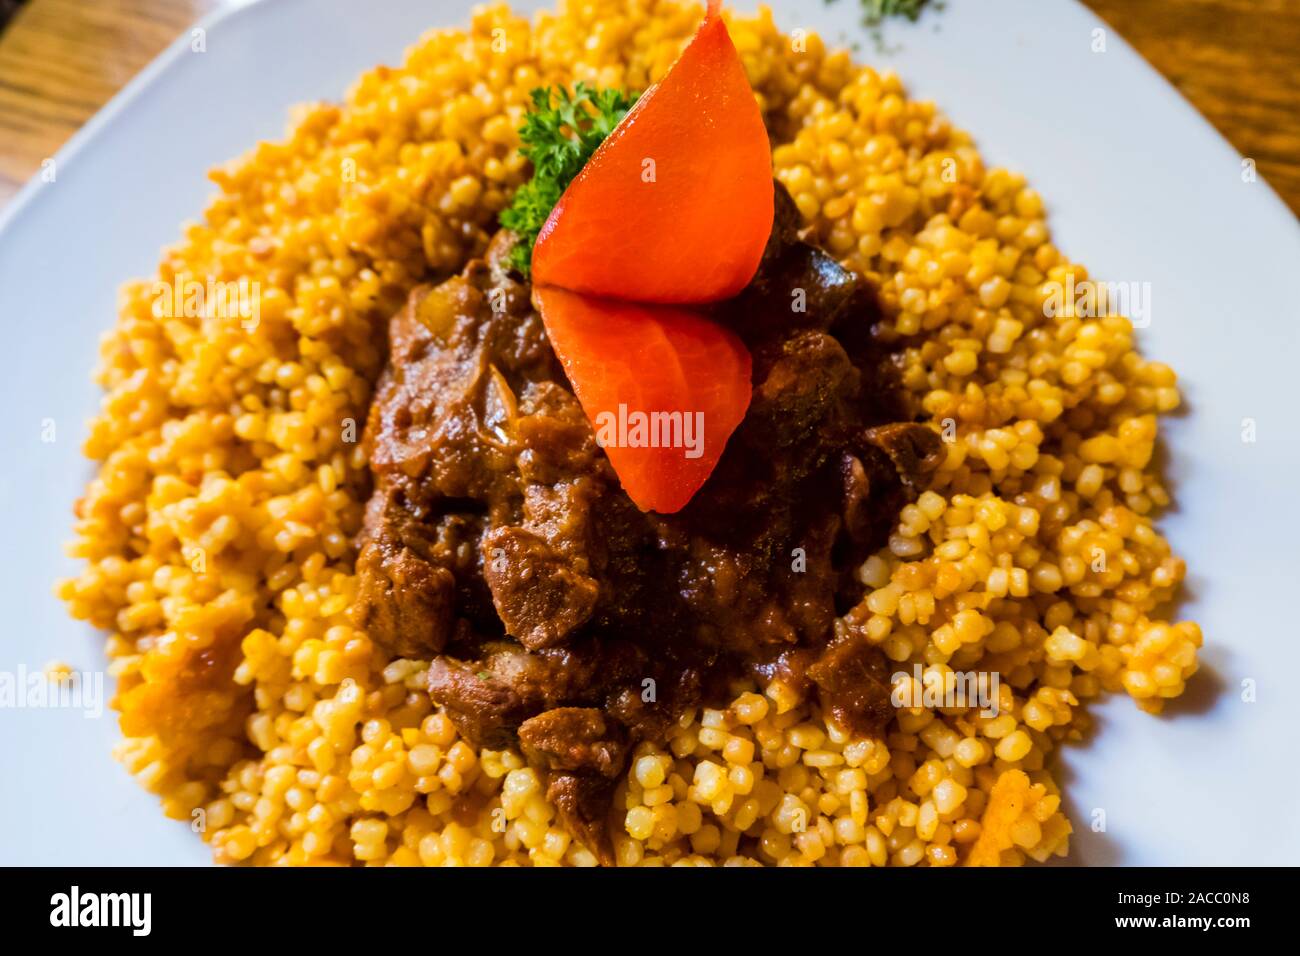 Pörkölt, meat stew, traditional Hungarian meal, Budapest, Hungary Stock Photo